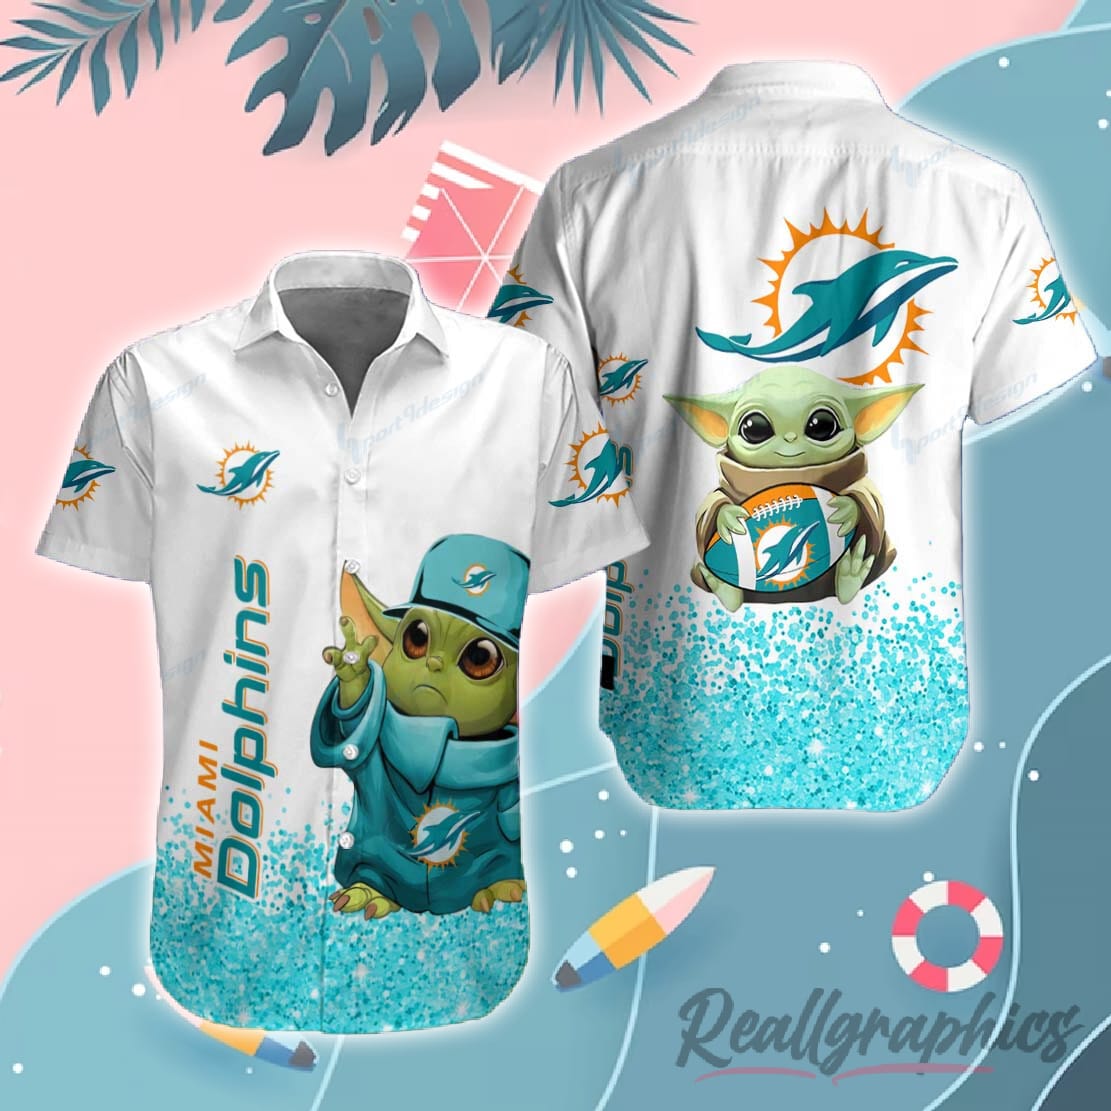 Miami Dolphins Button Up Shirt - Reallgraphics